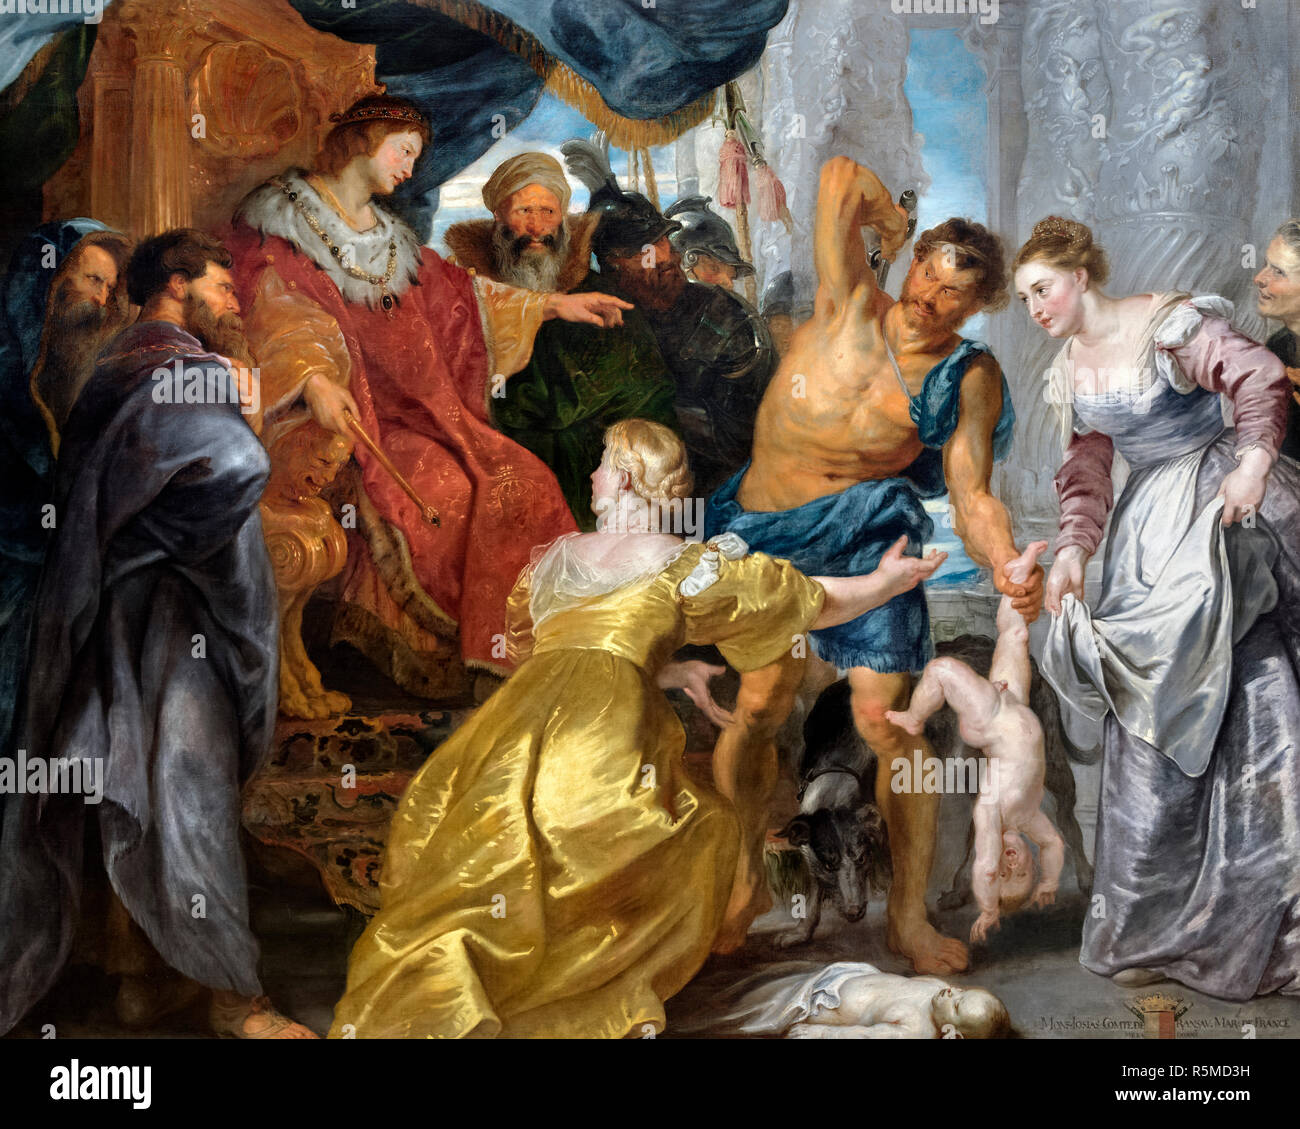 The Judgement of Solomon by Peter Paul Rubens (1577-1640), oil on canvas, c.1617 Stock Photo